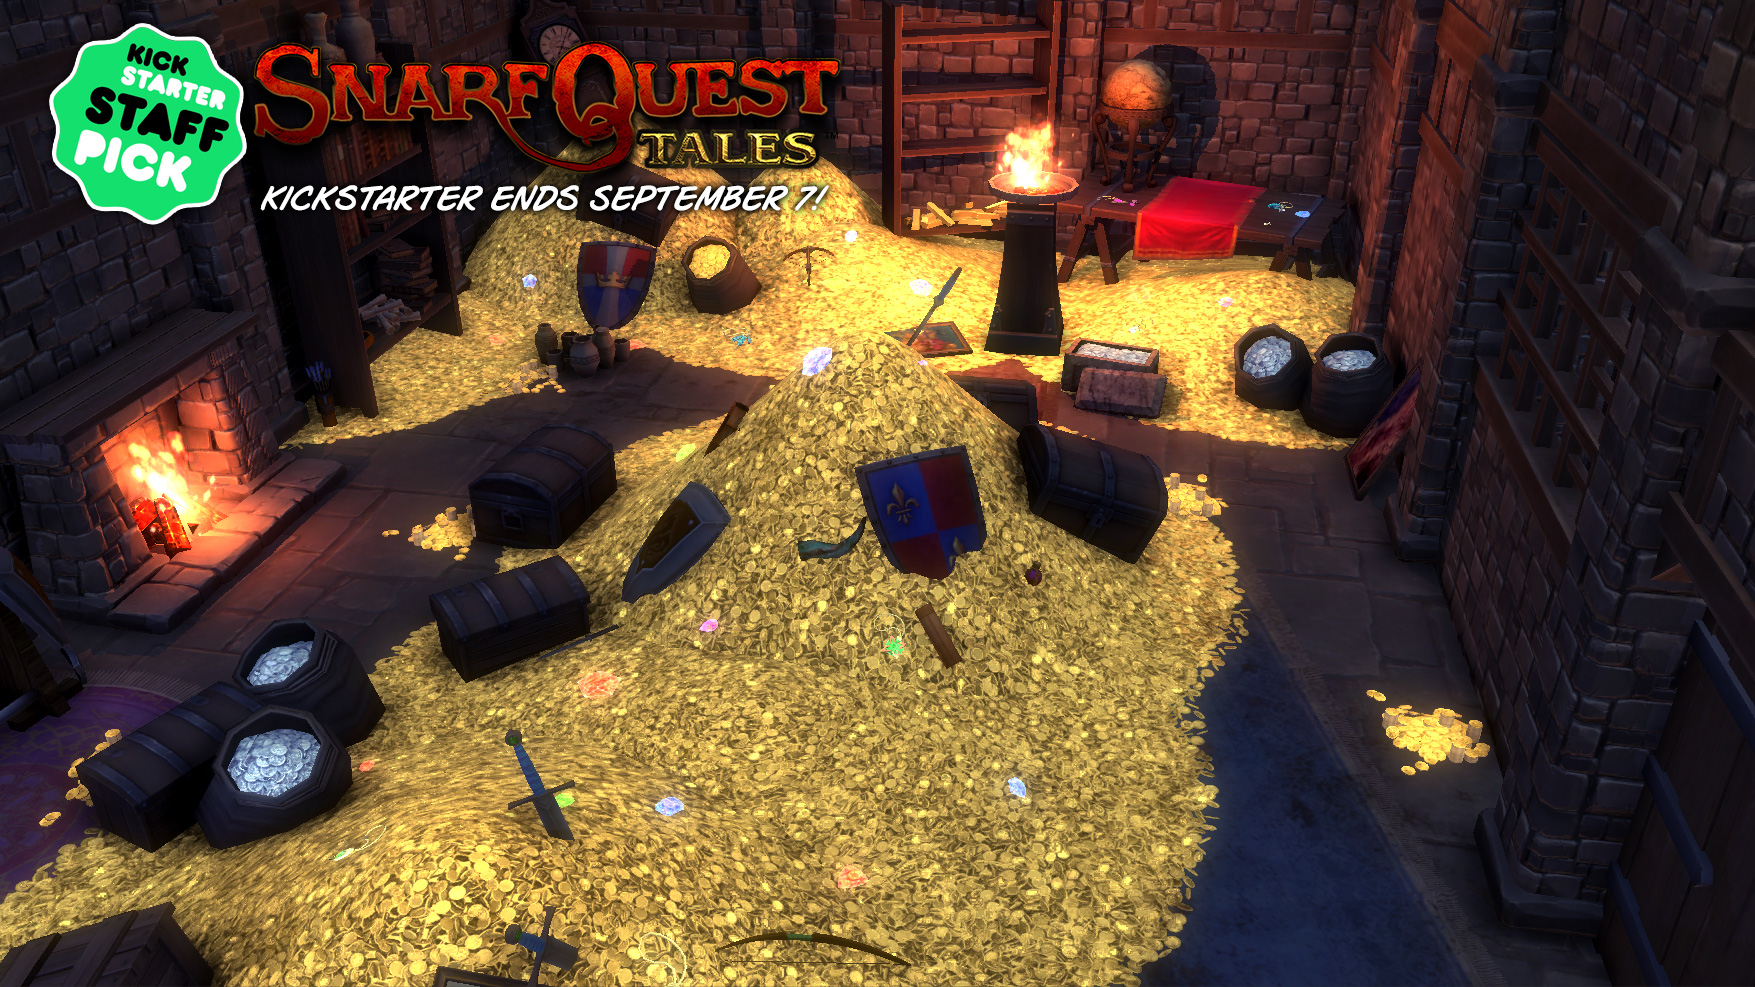 A treasure room from SnarfQuest Tales